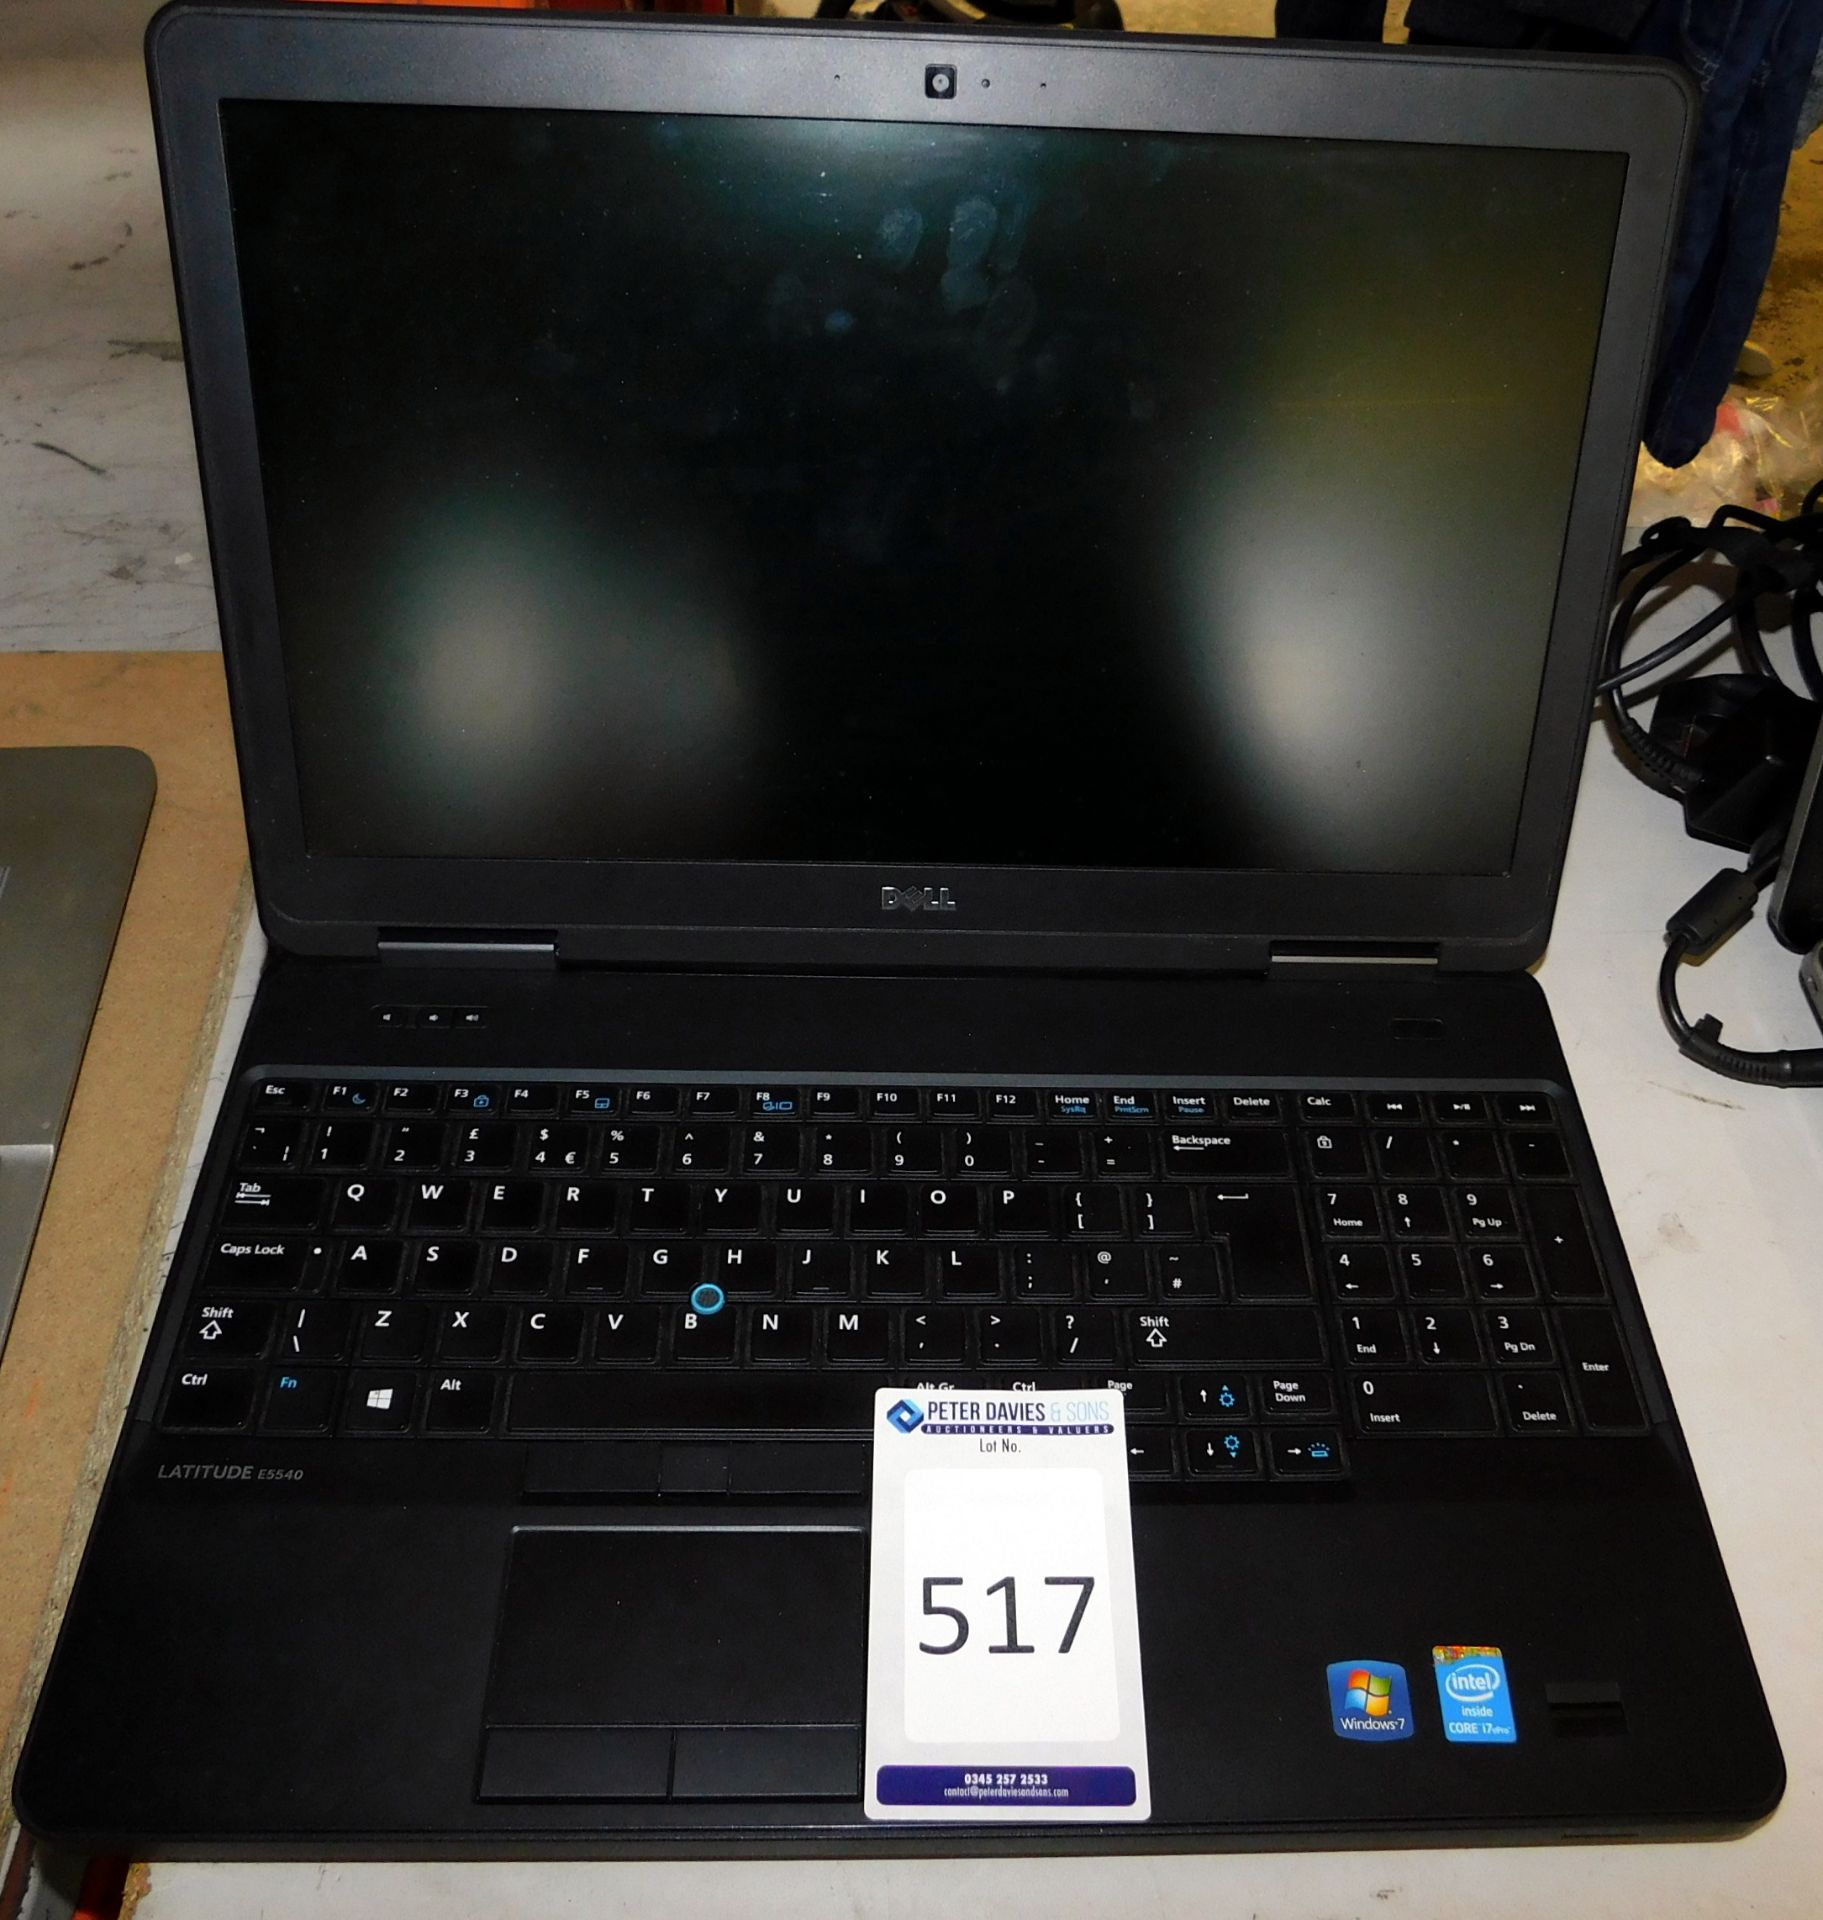 Dell Latitude E5540 i7 2.1ghz Laptop with 8gb RAM, 320gb HDD (Located Stockport – Viewing by